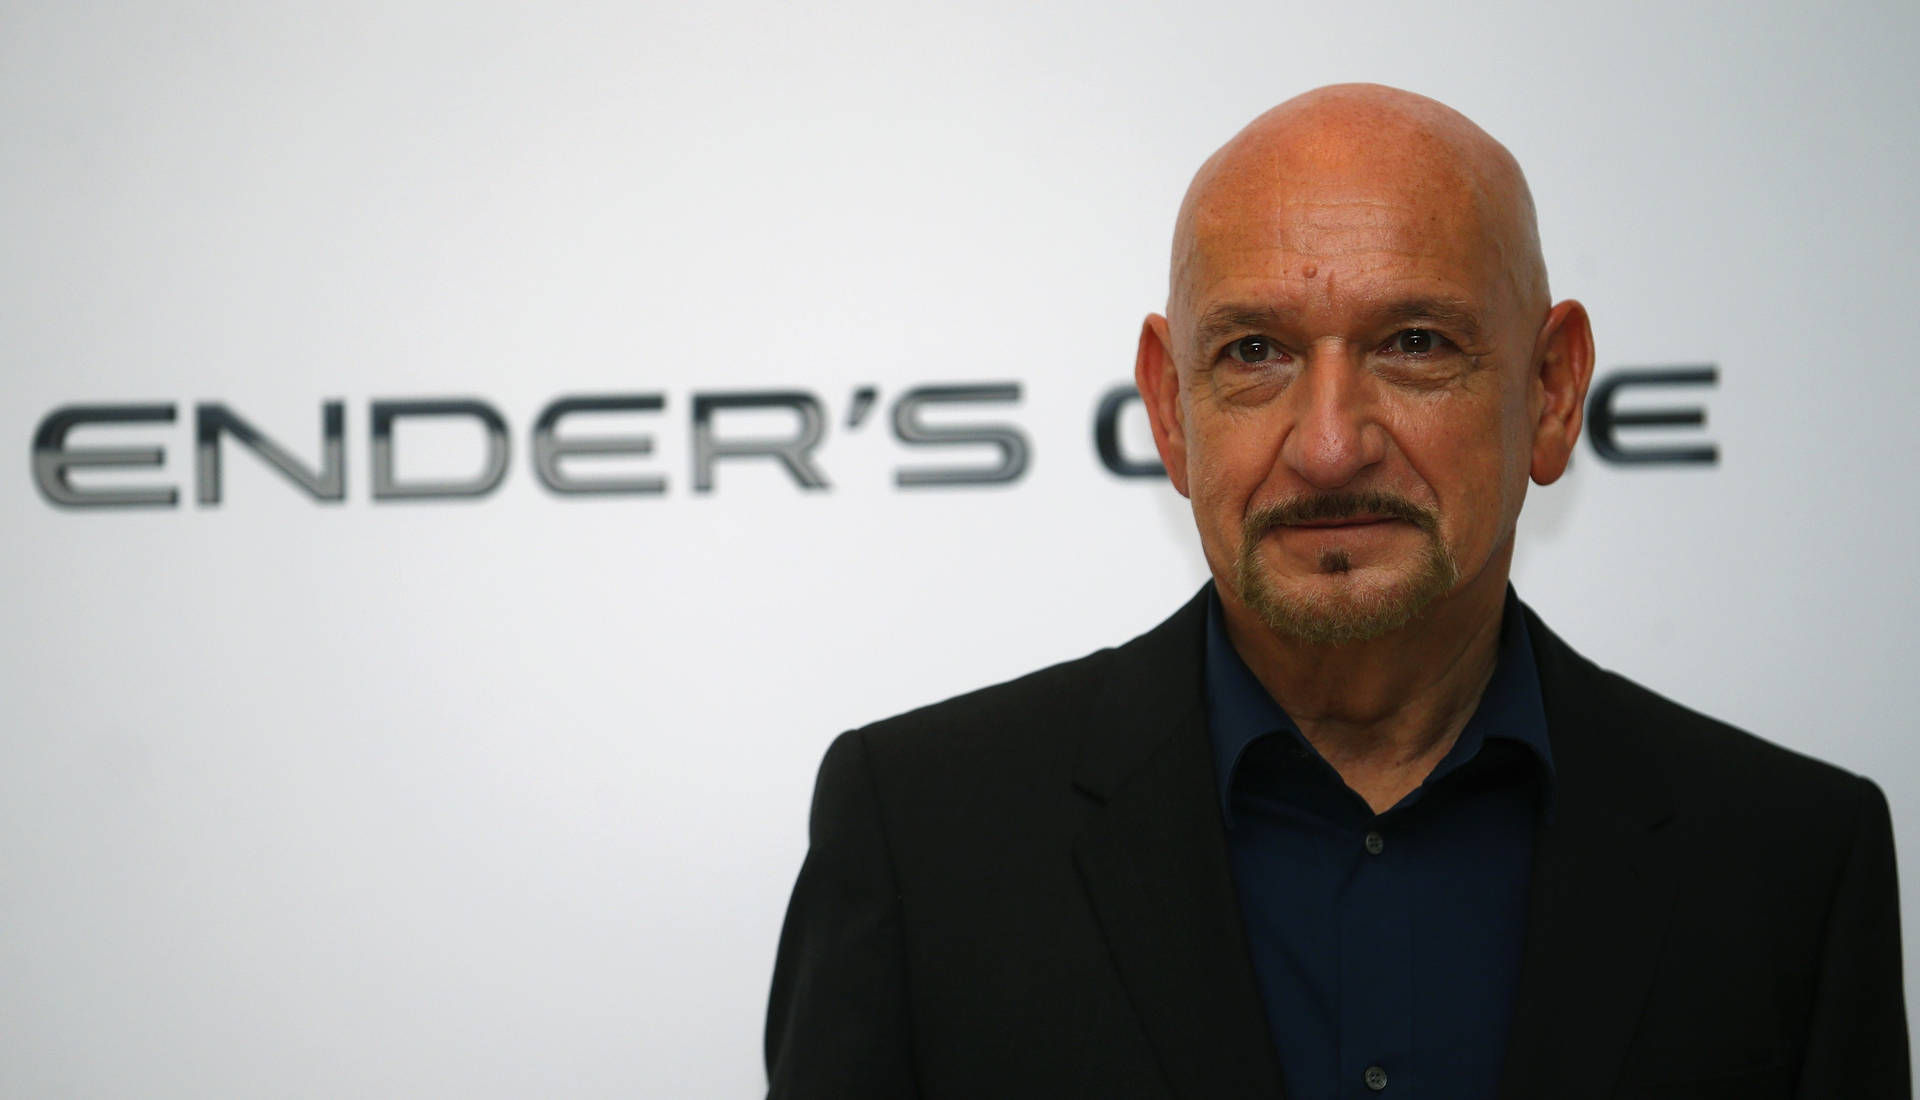 Free Ben Kingsley Pictures , [100+] Ben Kingsley Pictures for FREE |  